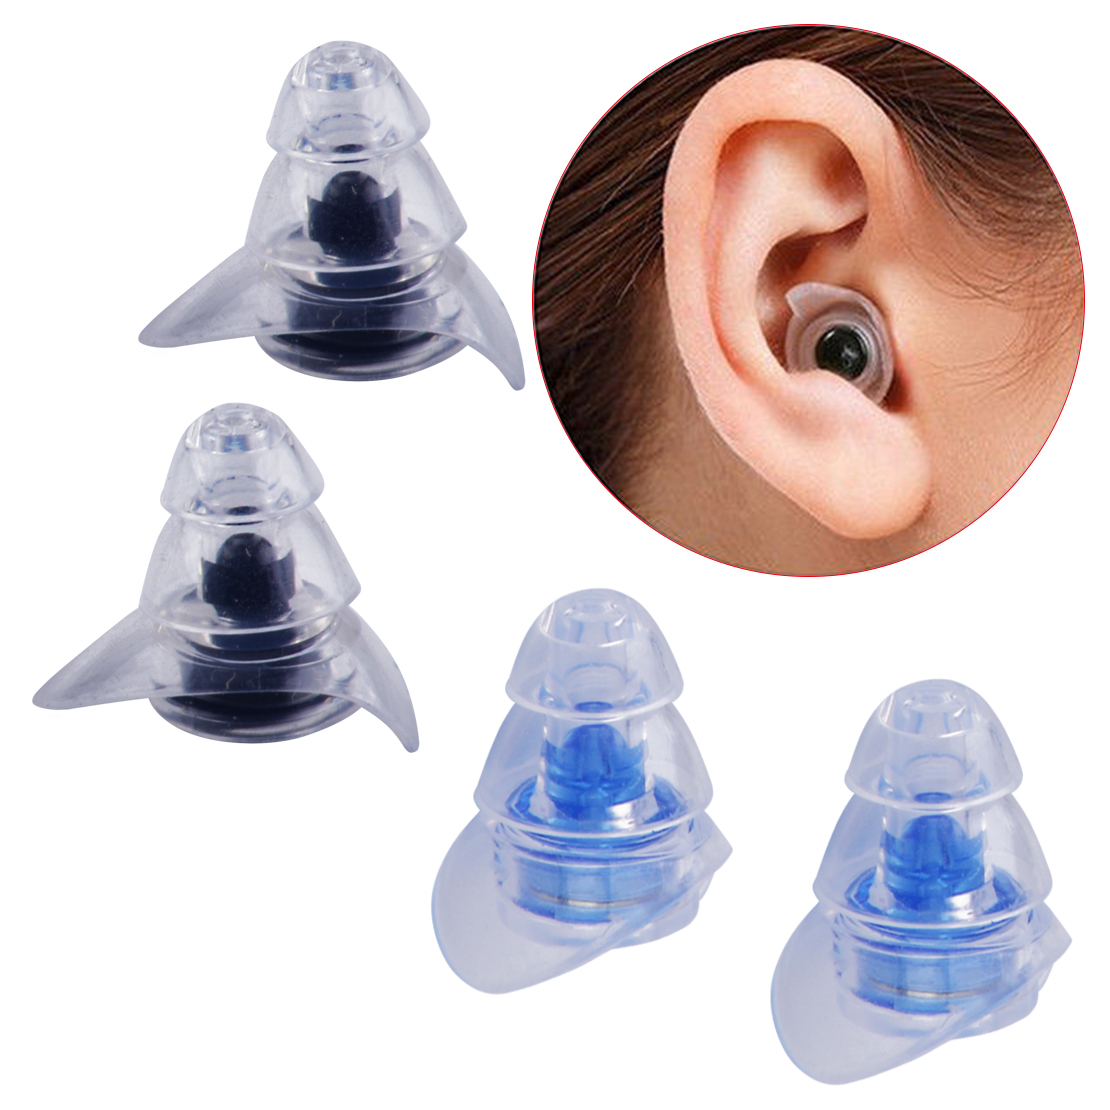 MusicSafe Pro Ear Plugs Hearing Protection System Noise Cancelling